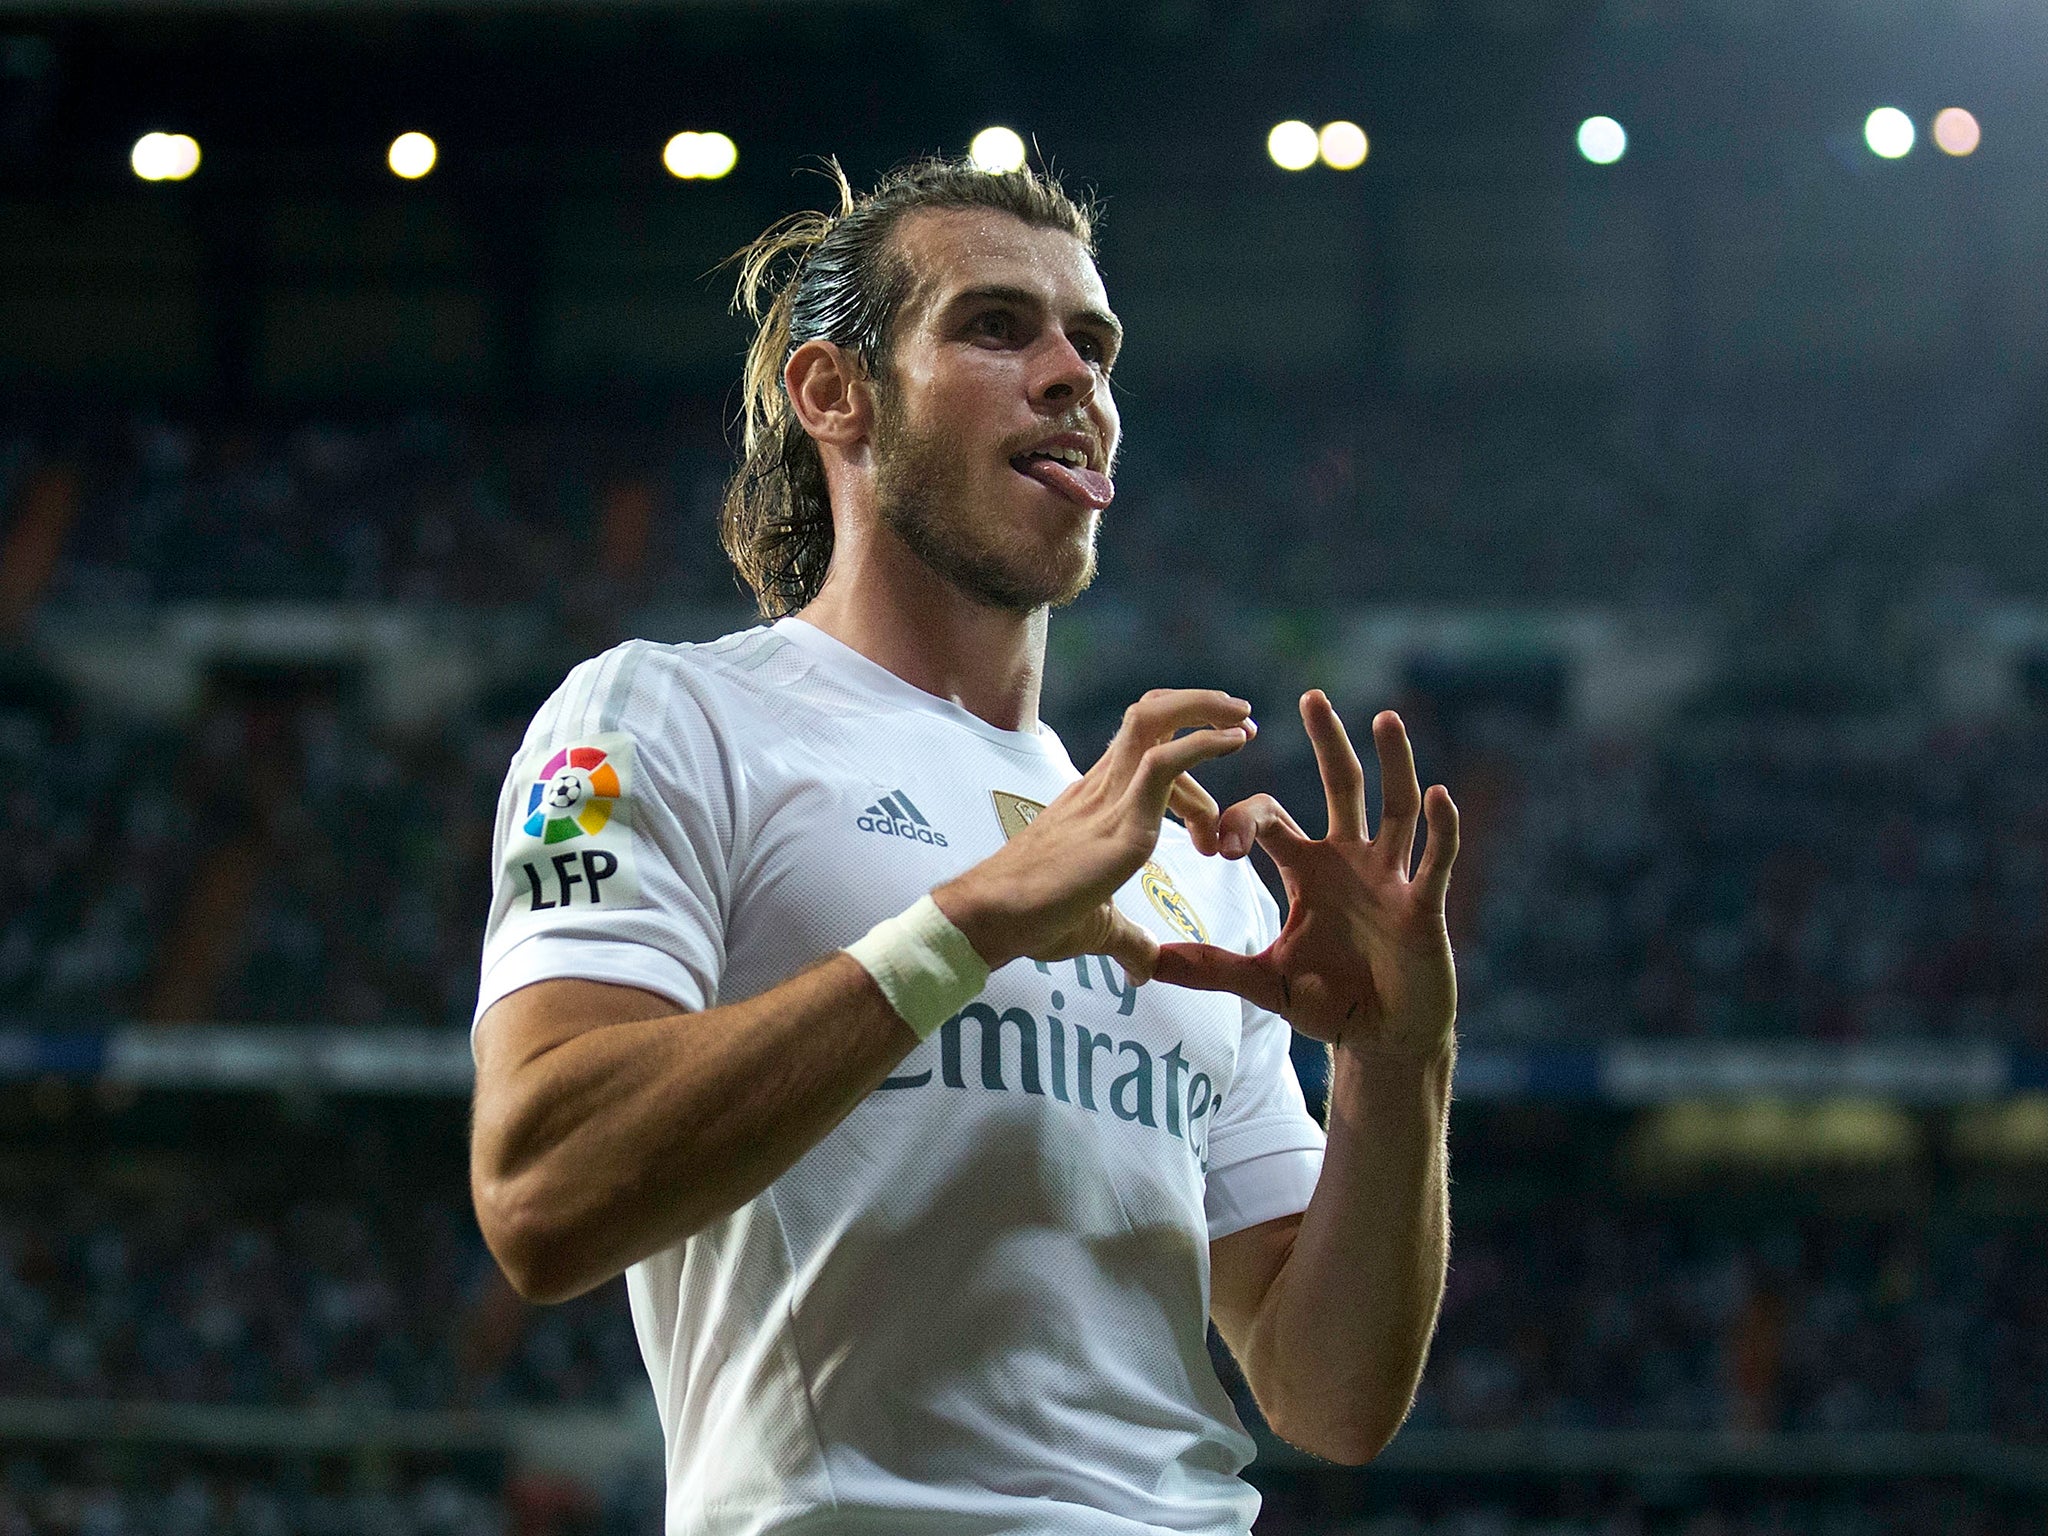 Gareth Bale has been linked with United yet again